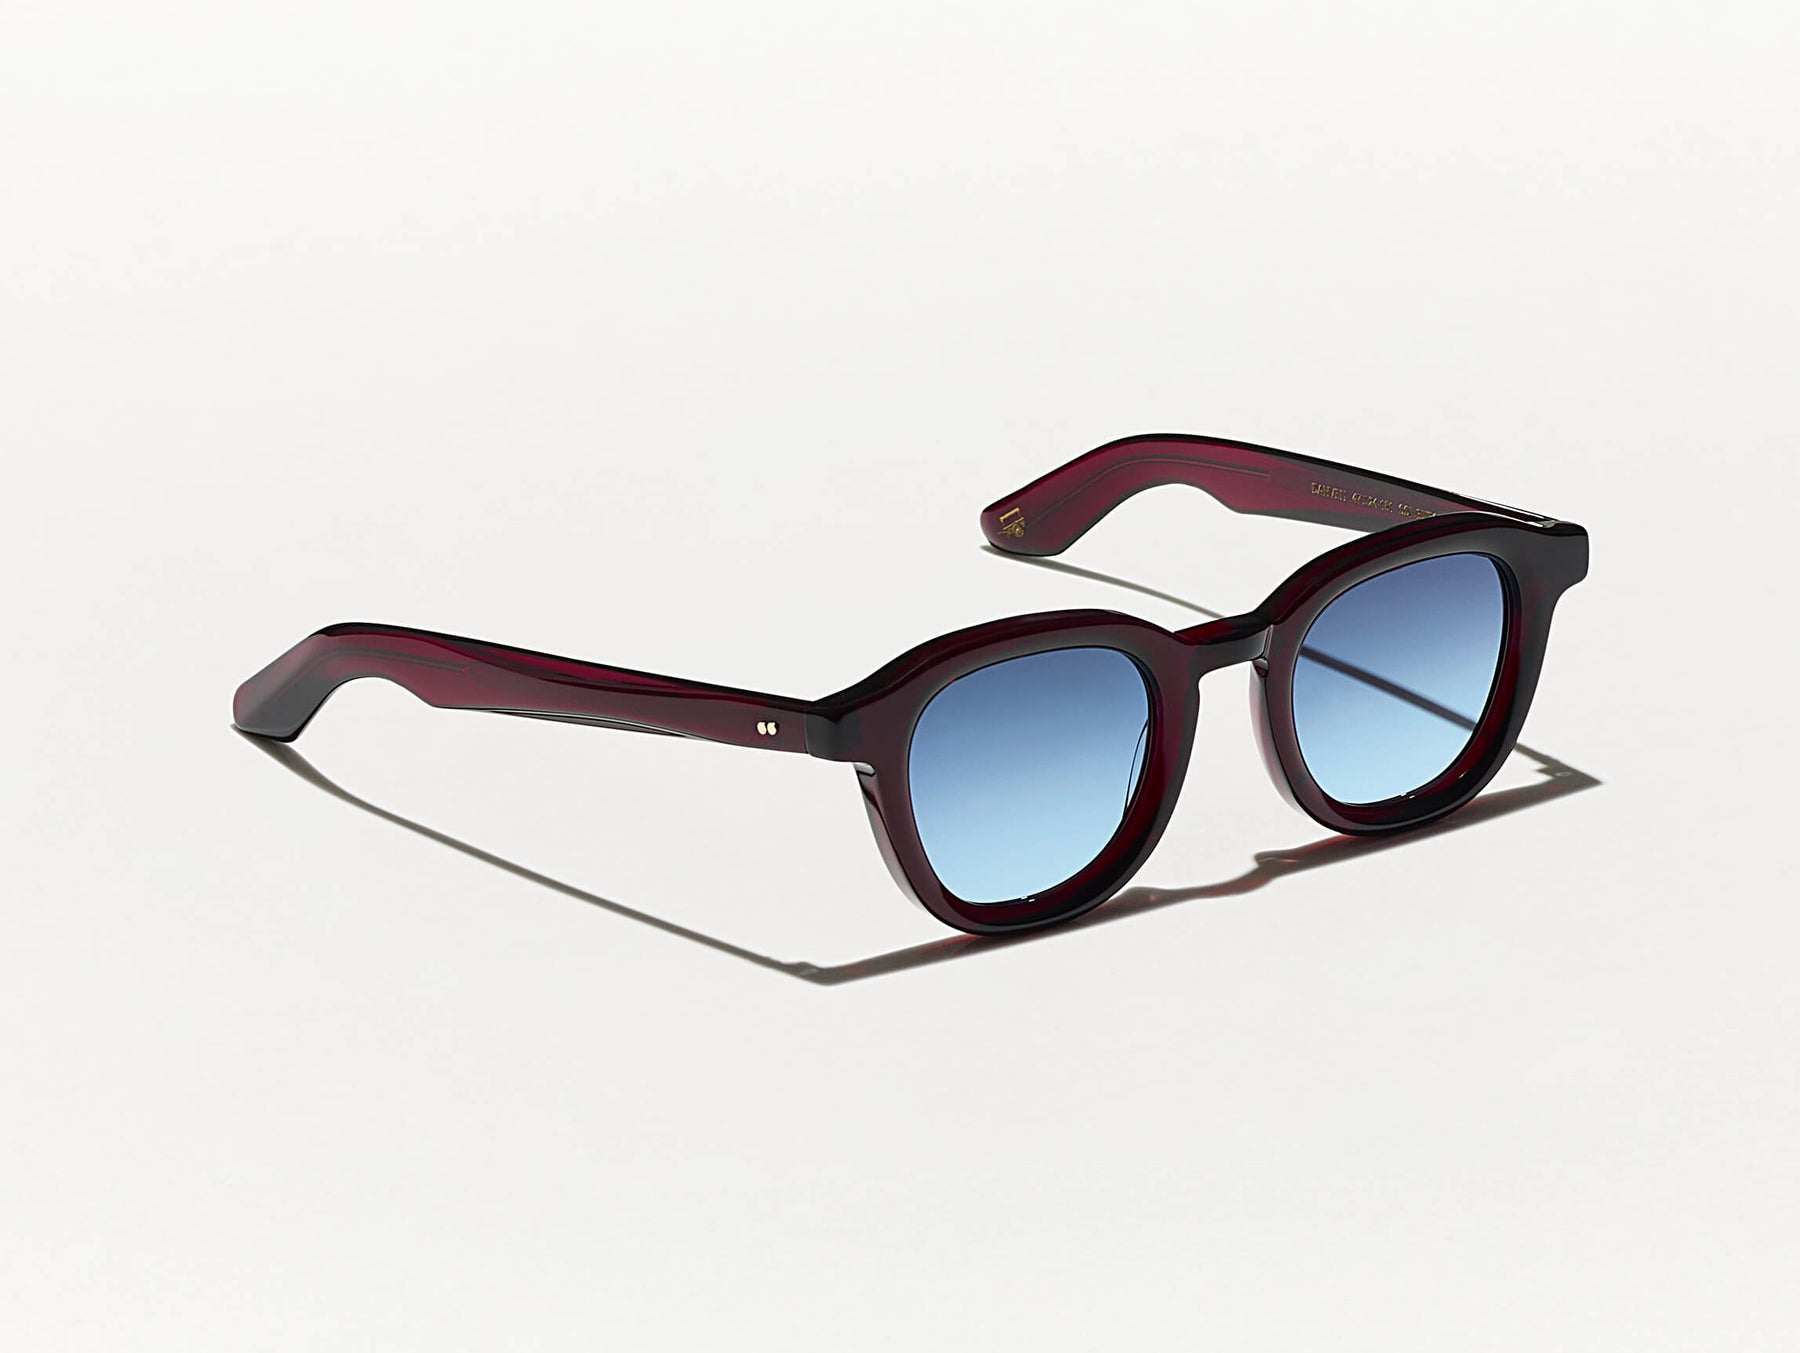 The DAHVEN in Burgundy with Denim Blue Tinted Lenses